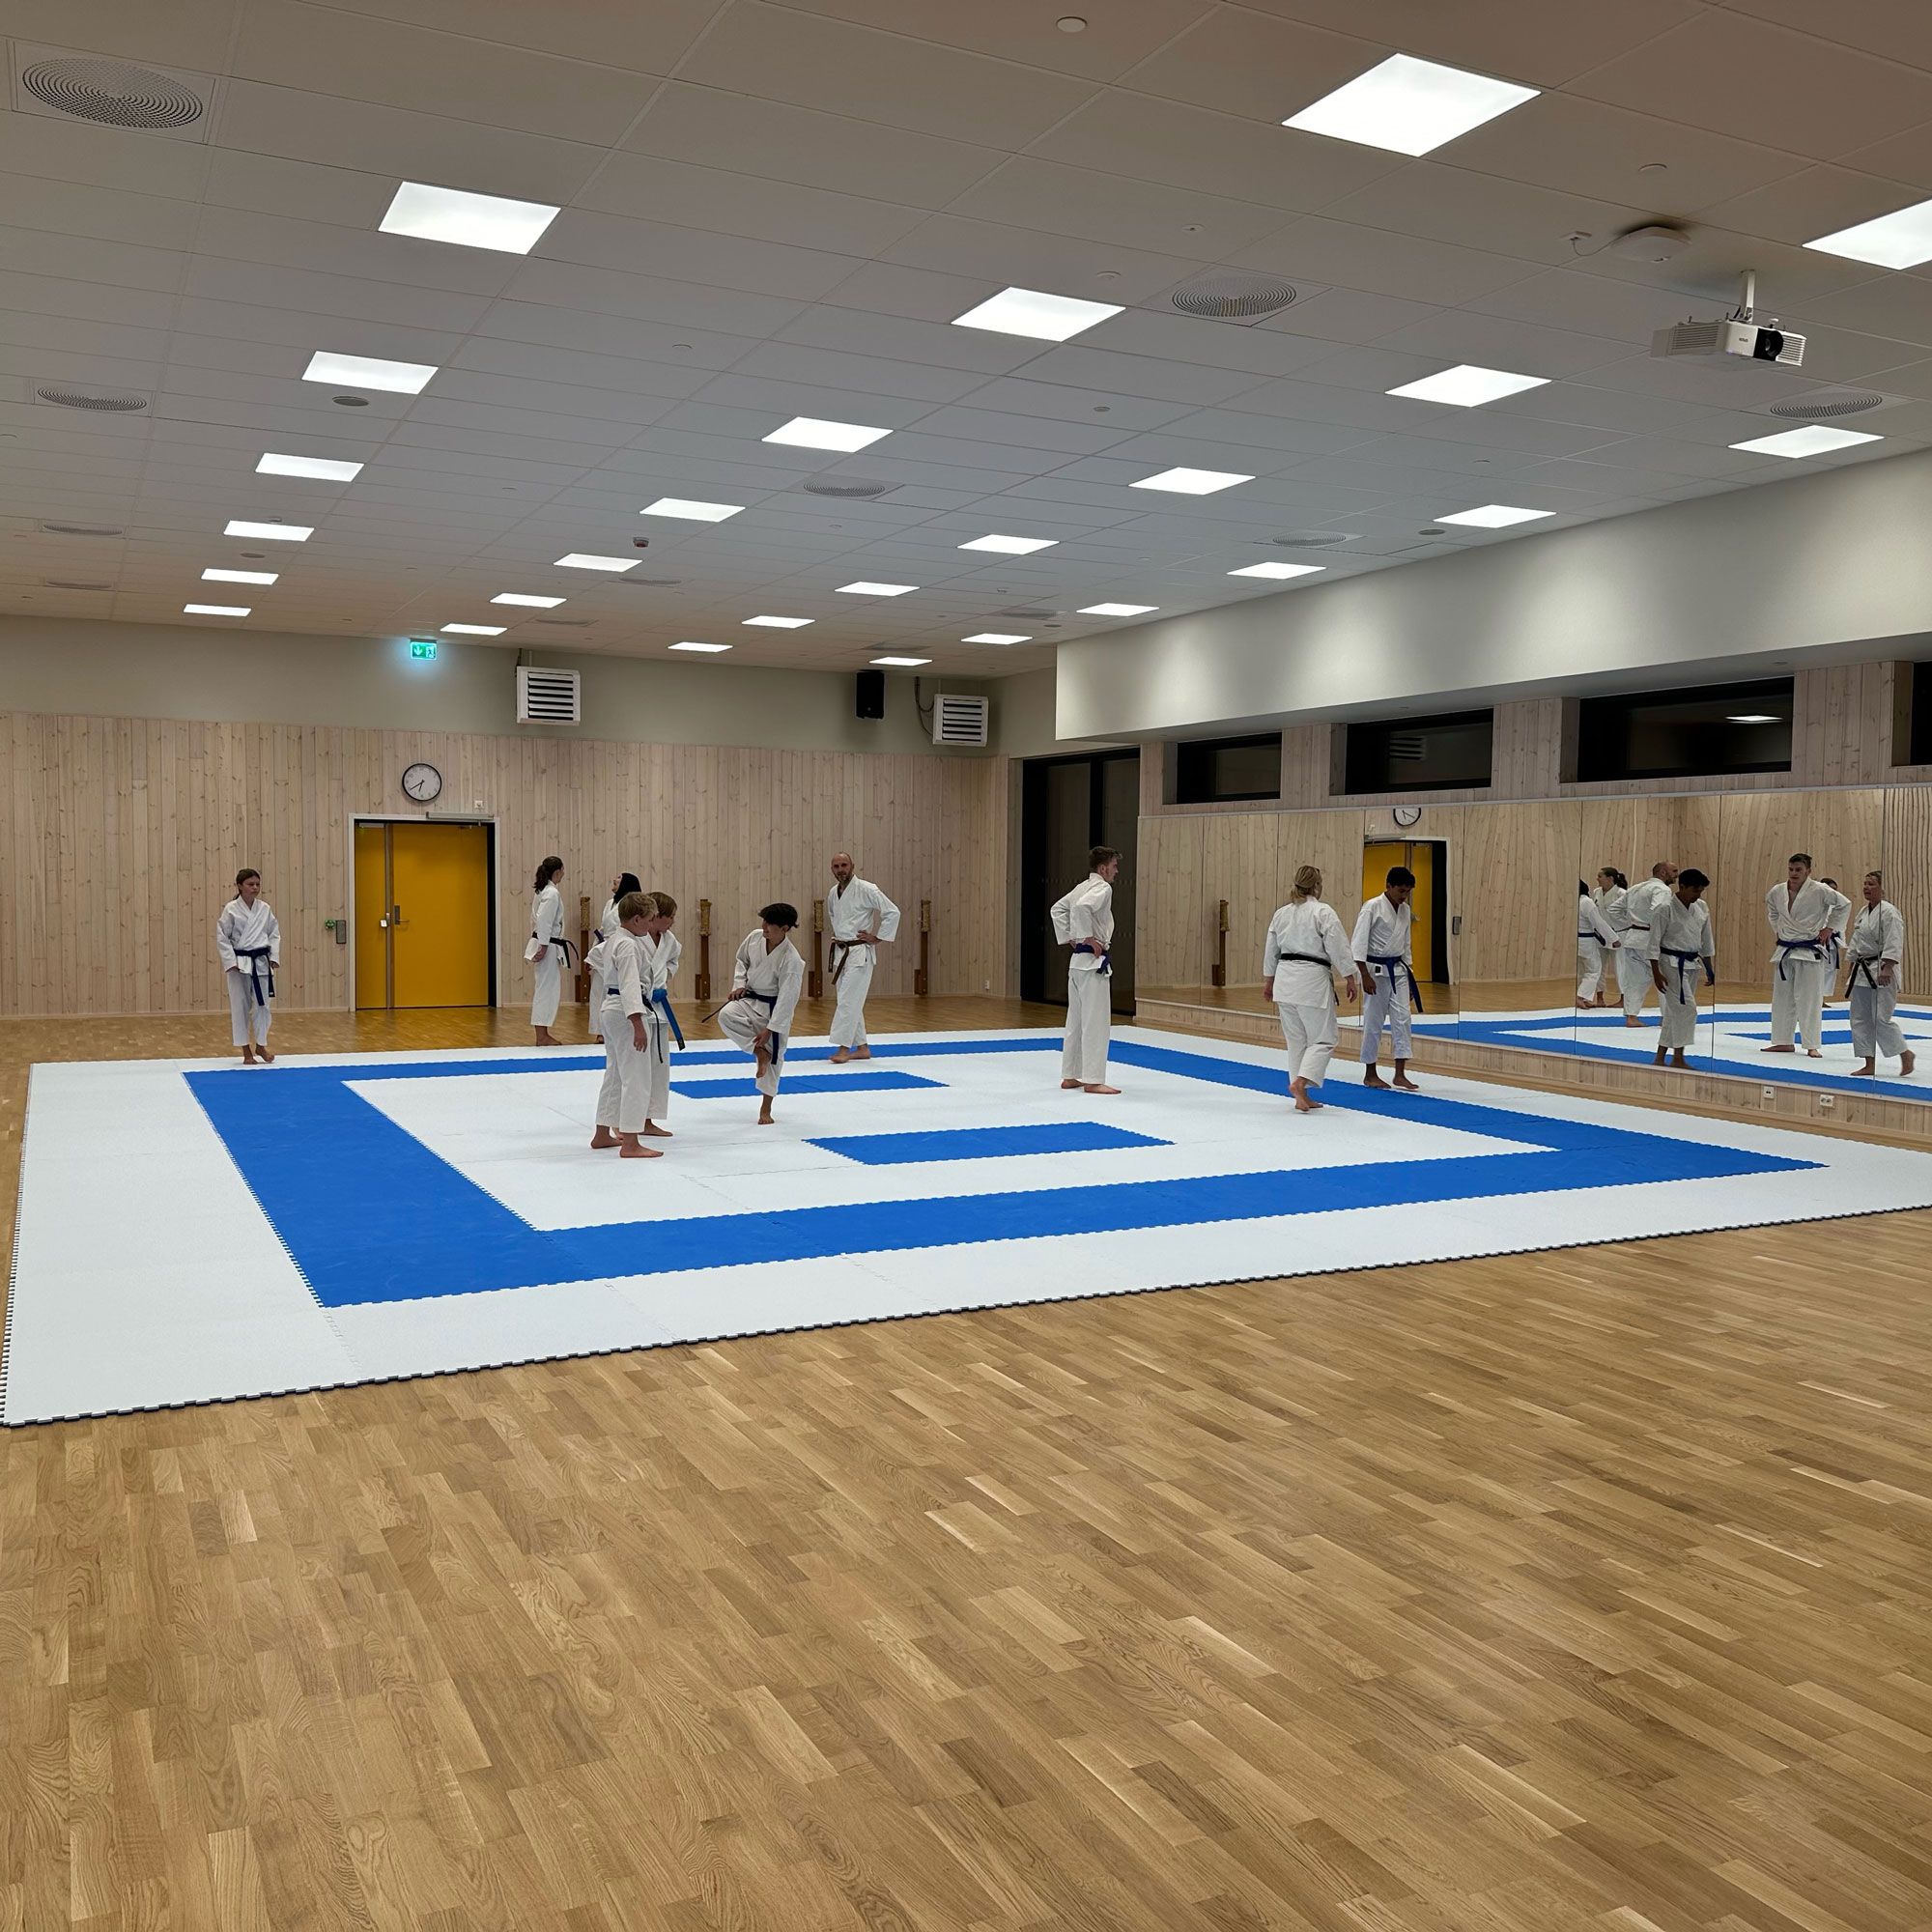 New tatami colours to be used at the 2019 World Judo Championships